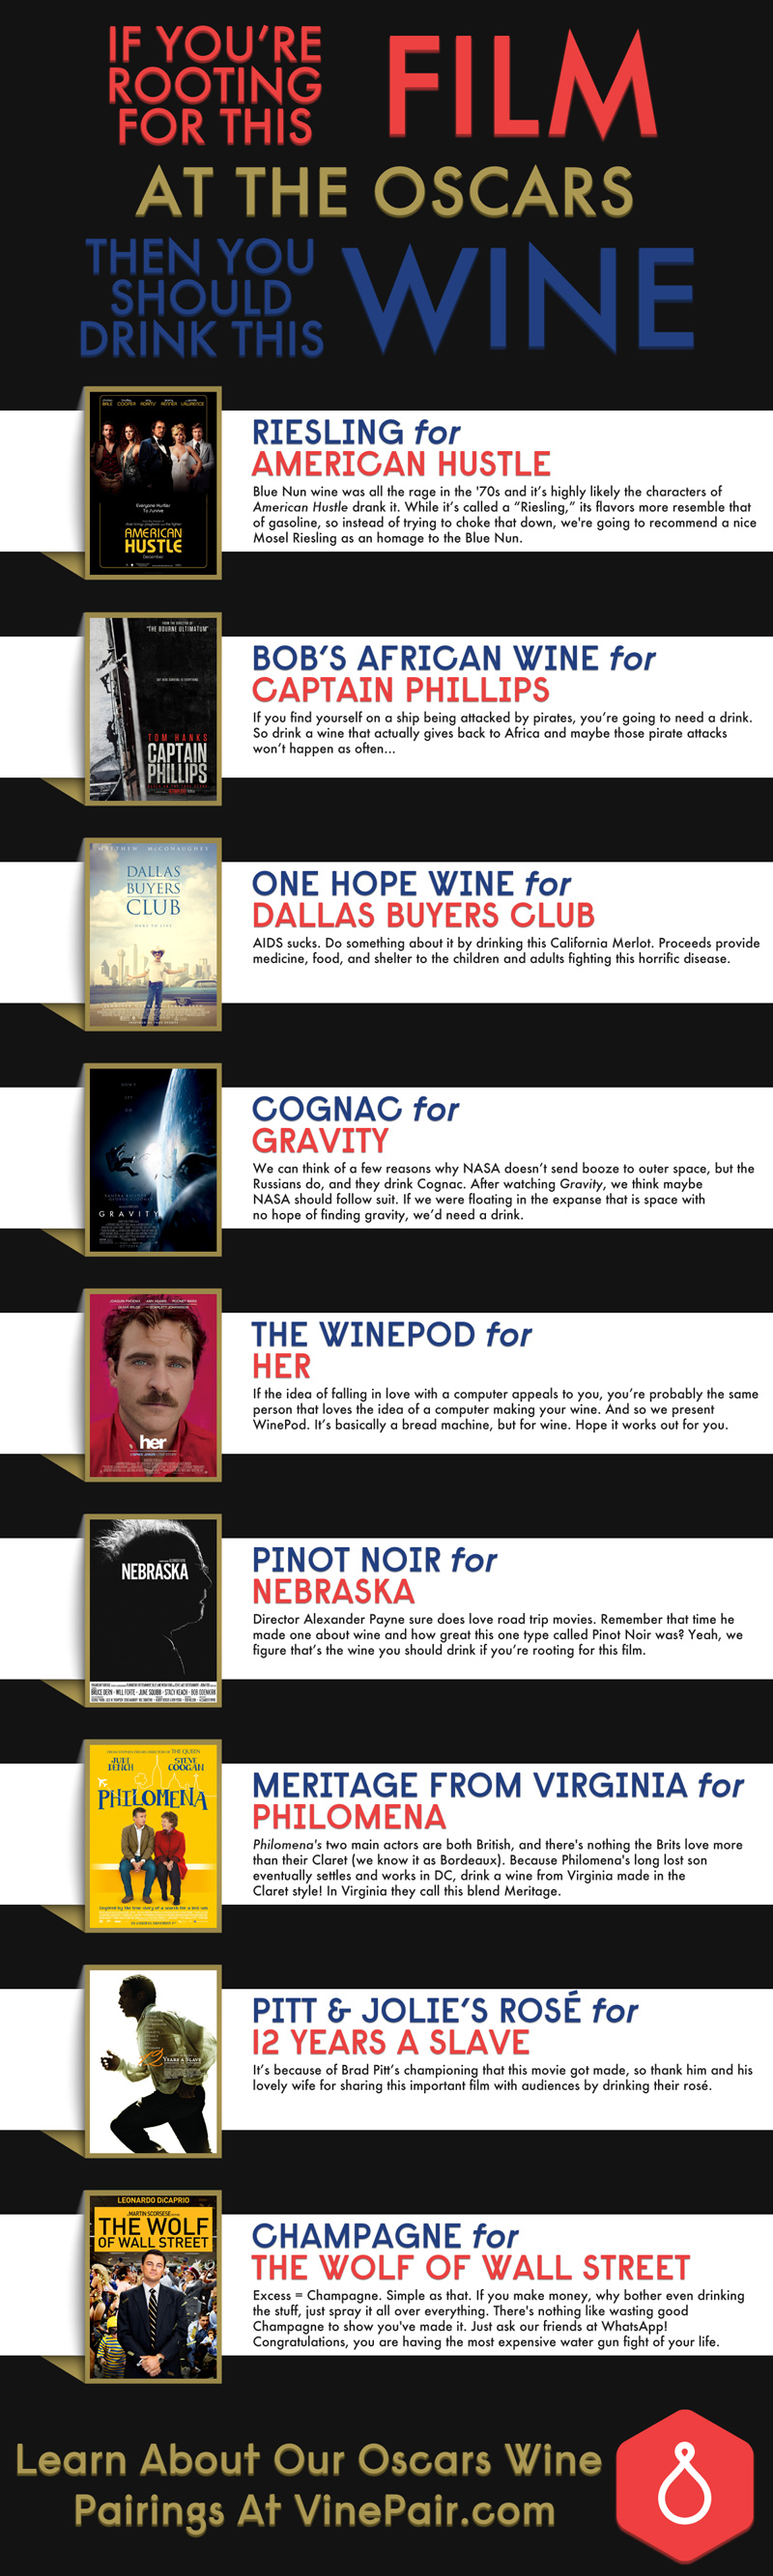 Pairing the Best Picture nominees from the 2014 Oscars with wines